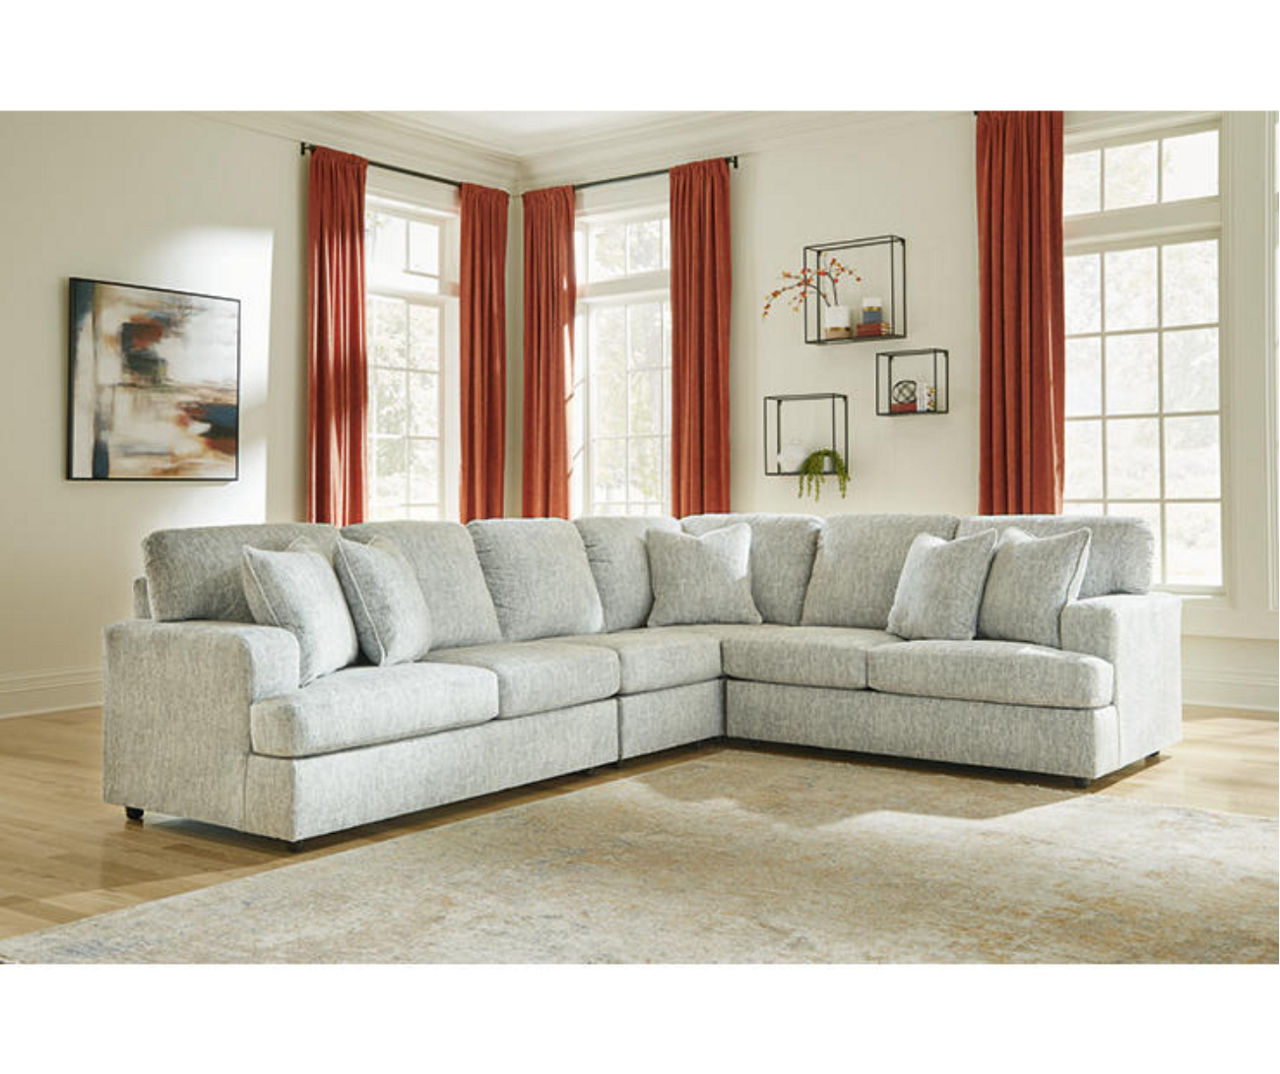 Signature Design By Ashley Playwrite Gray 4-Piece Sectional